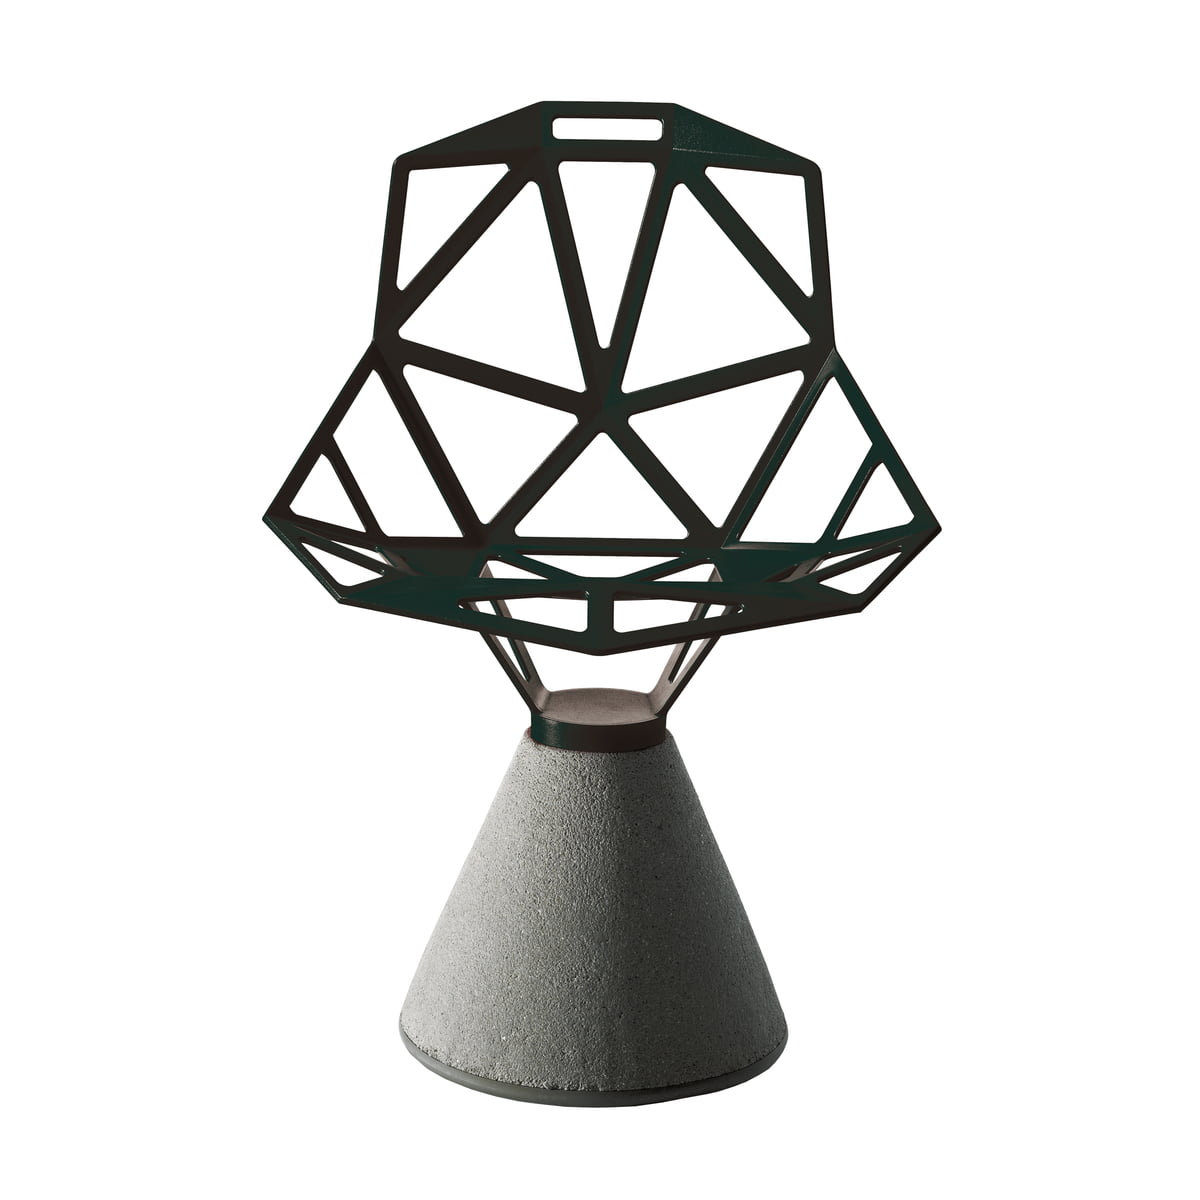 Chair One with concrete base | Magis | Shop